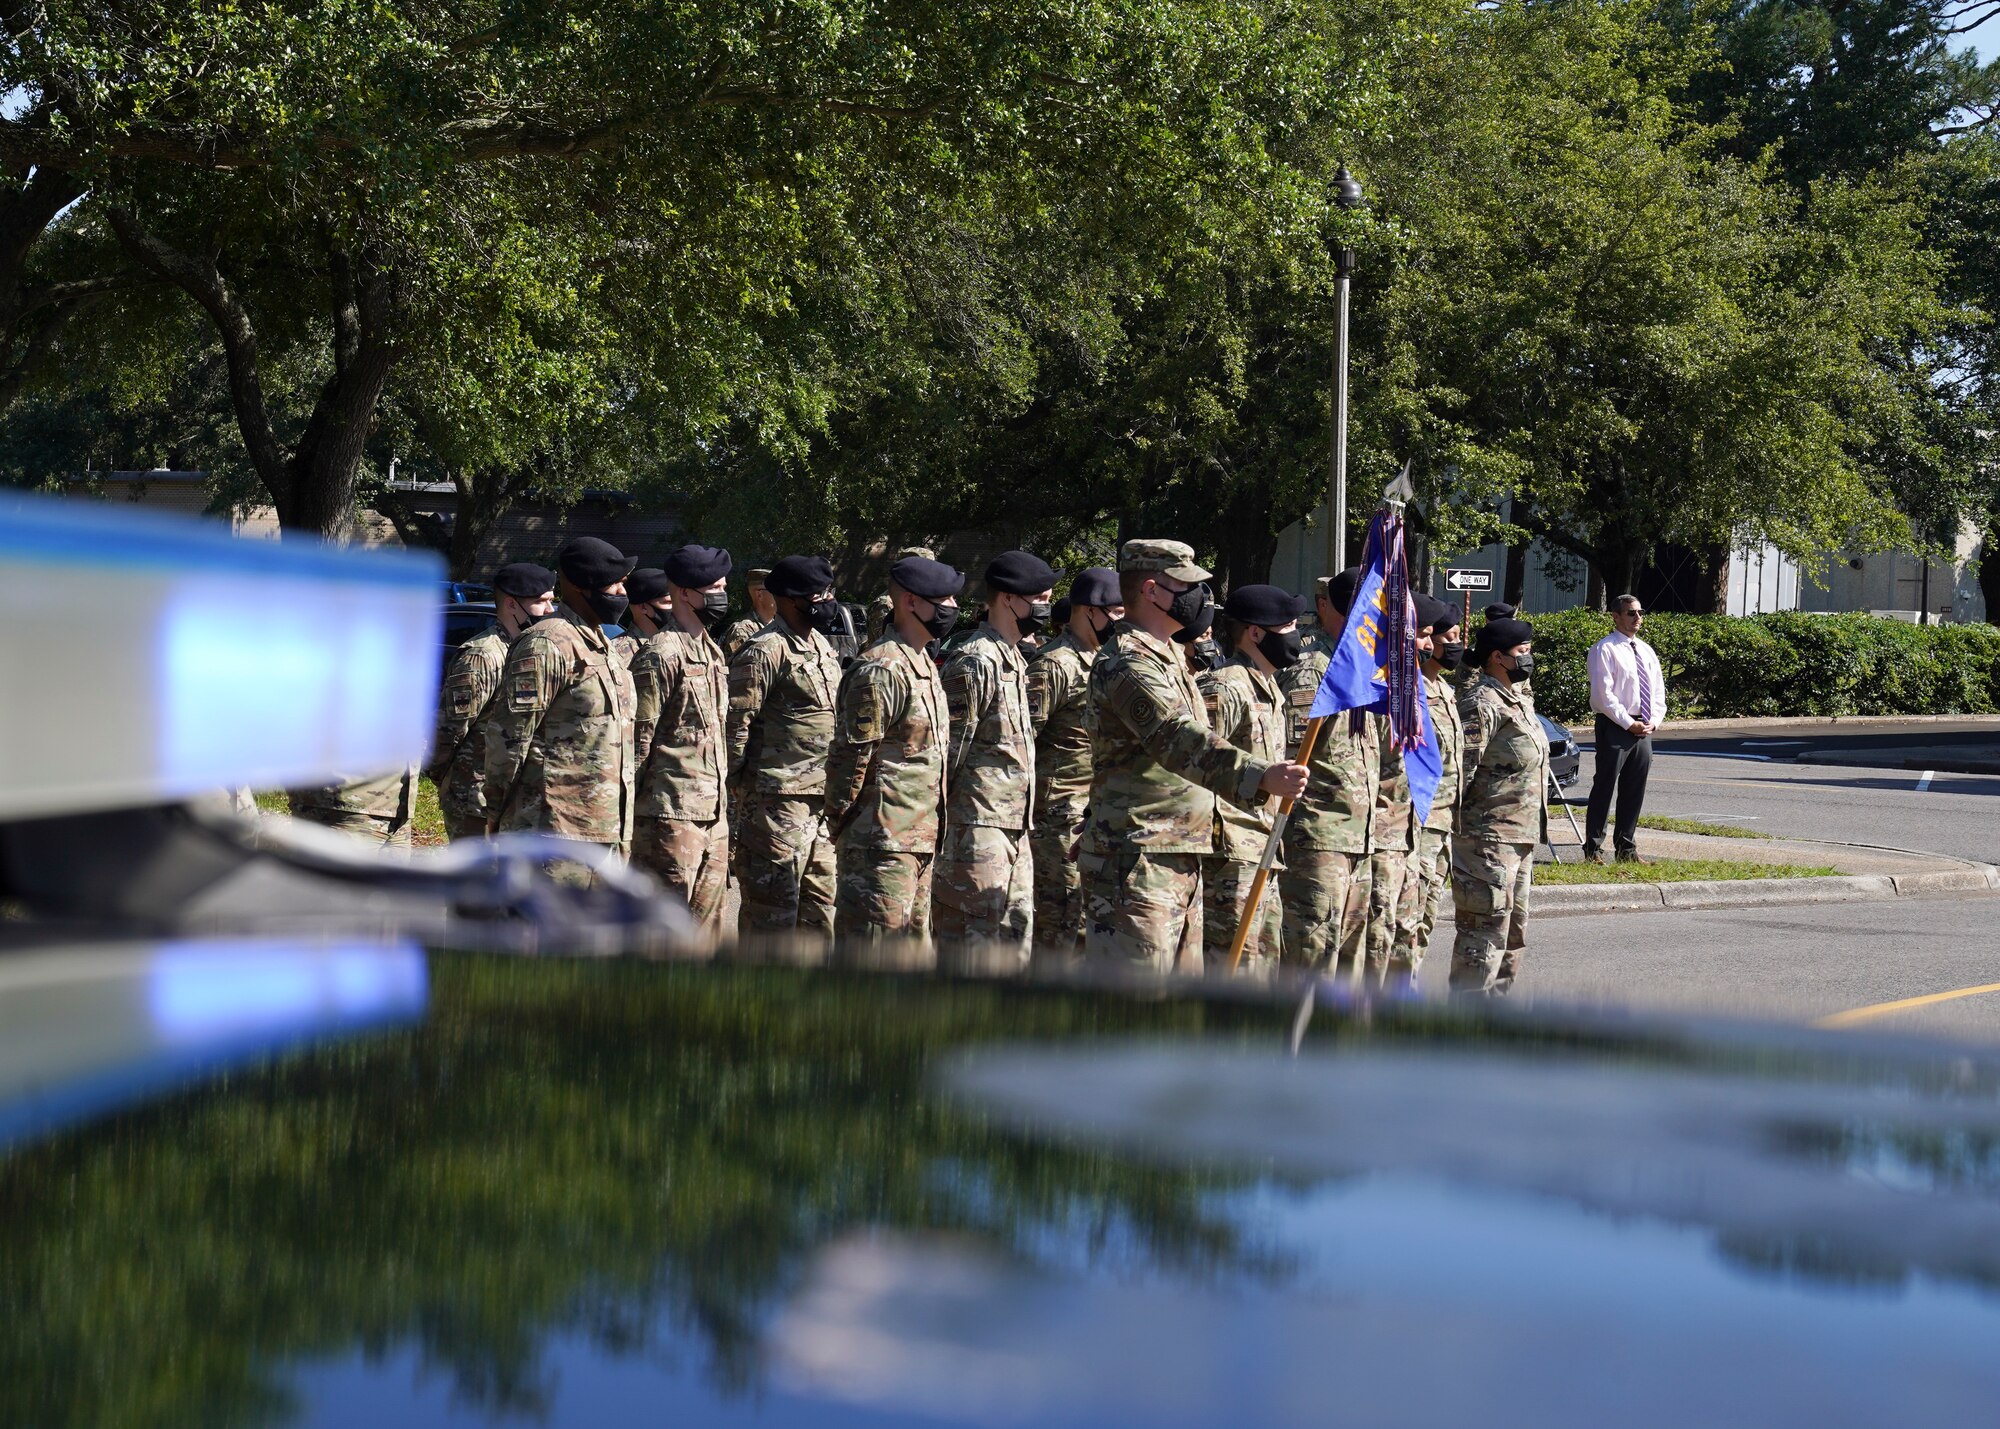 Airmen from the 81st Security Forces Squadron stand in formation during the Police Week retreat ceremony at Keesler Air Force Base, Mississippi, May 14, 2021. The event was held during National Police Week, recognizing the men and women in law enforcement. (U.S. Air Force photo by Senior Airman Spencer Tobler)